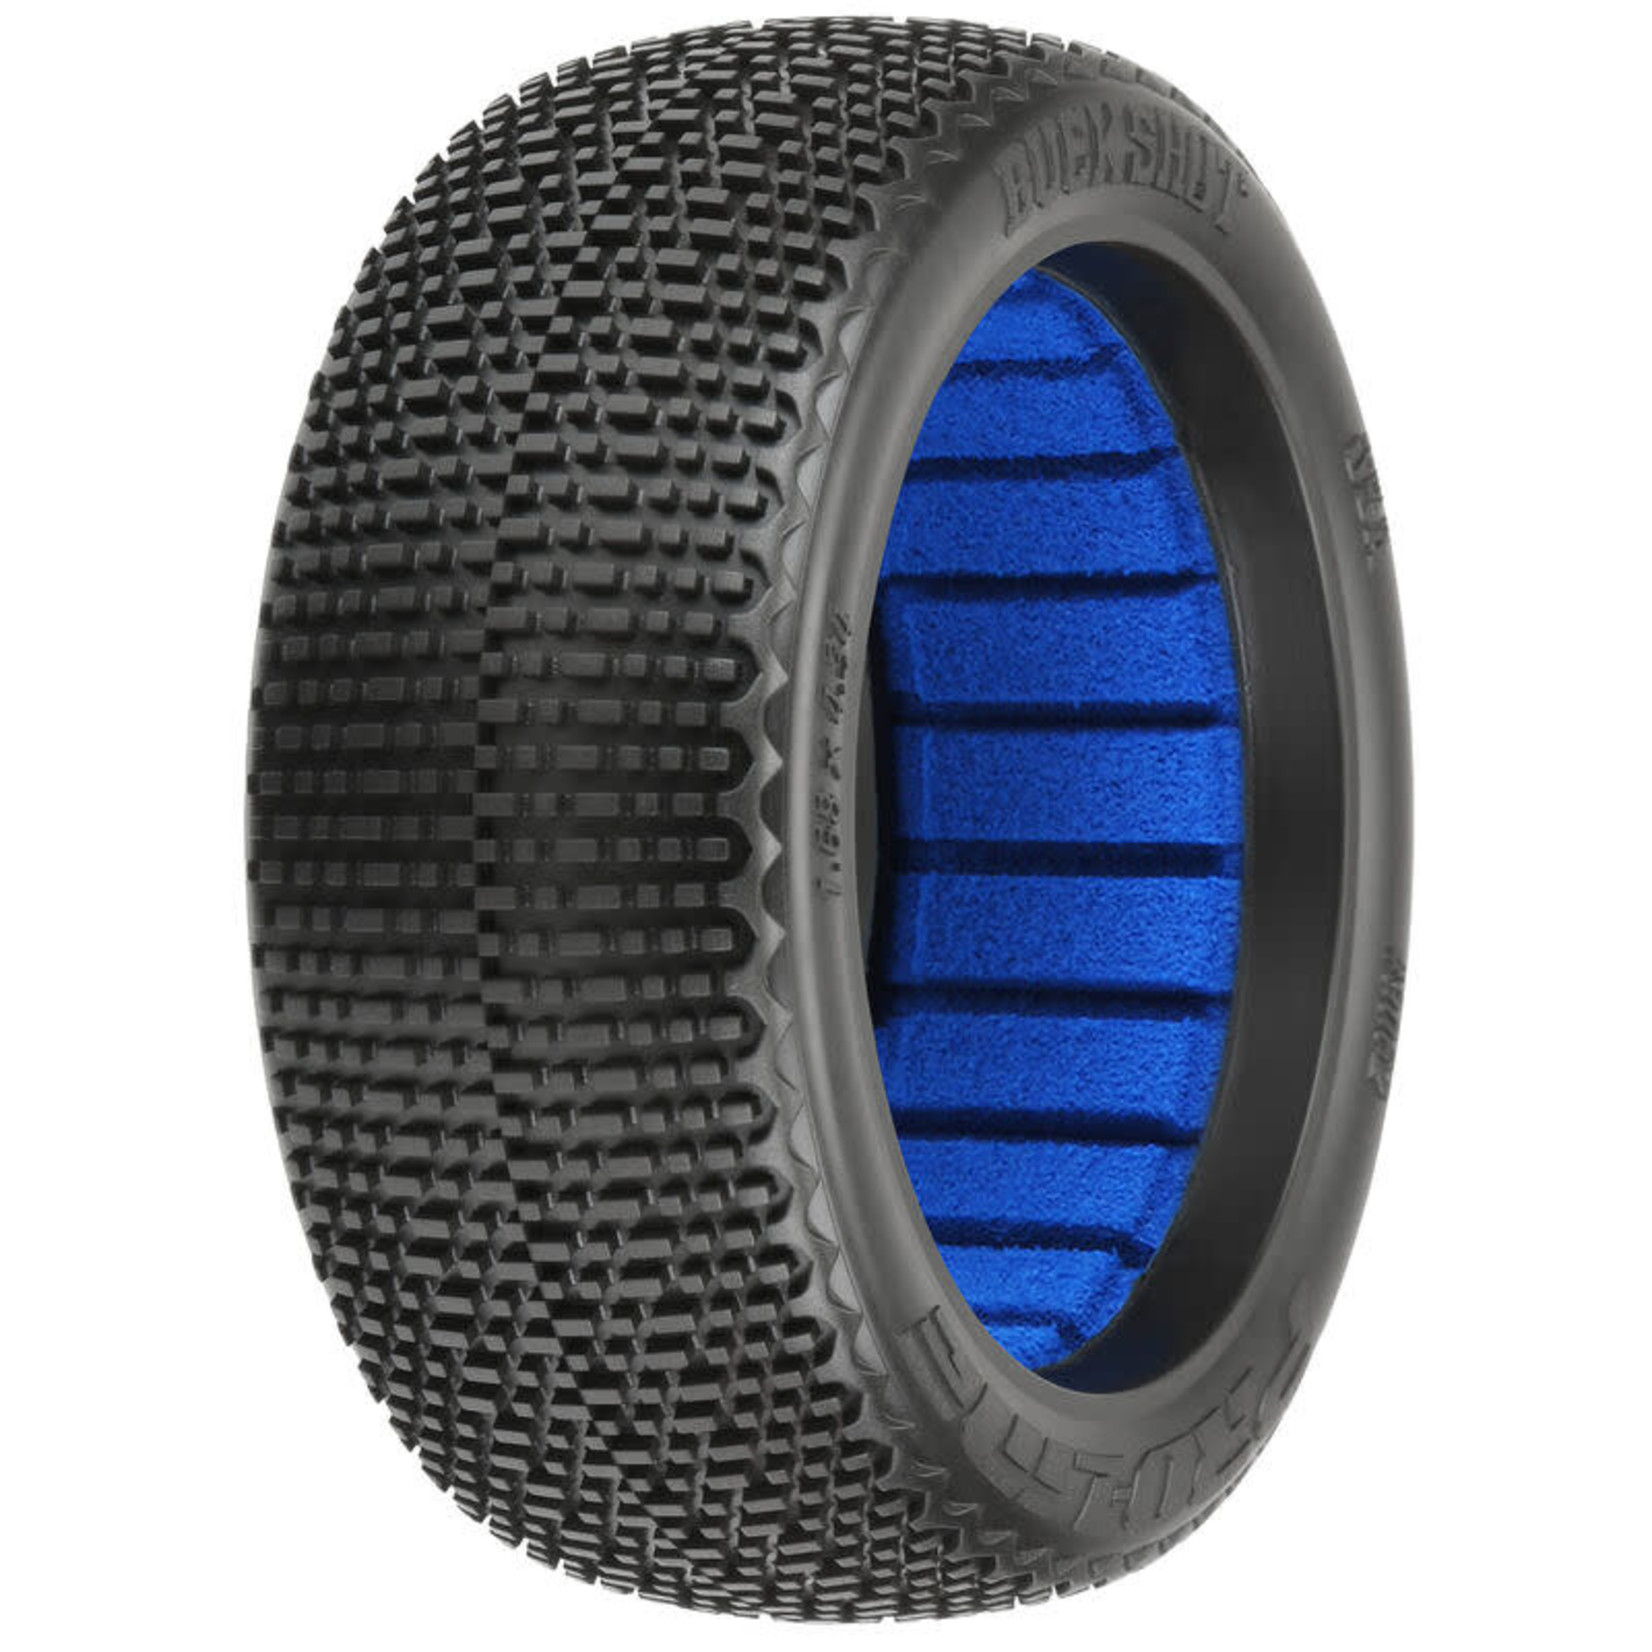 Pro-line Pro-line 1/8 Buck Shot S3 Front/Rear Off-Road Buggy Tires (2)